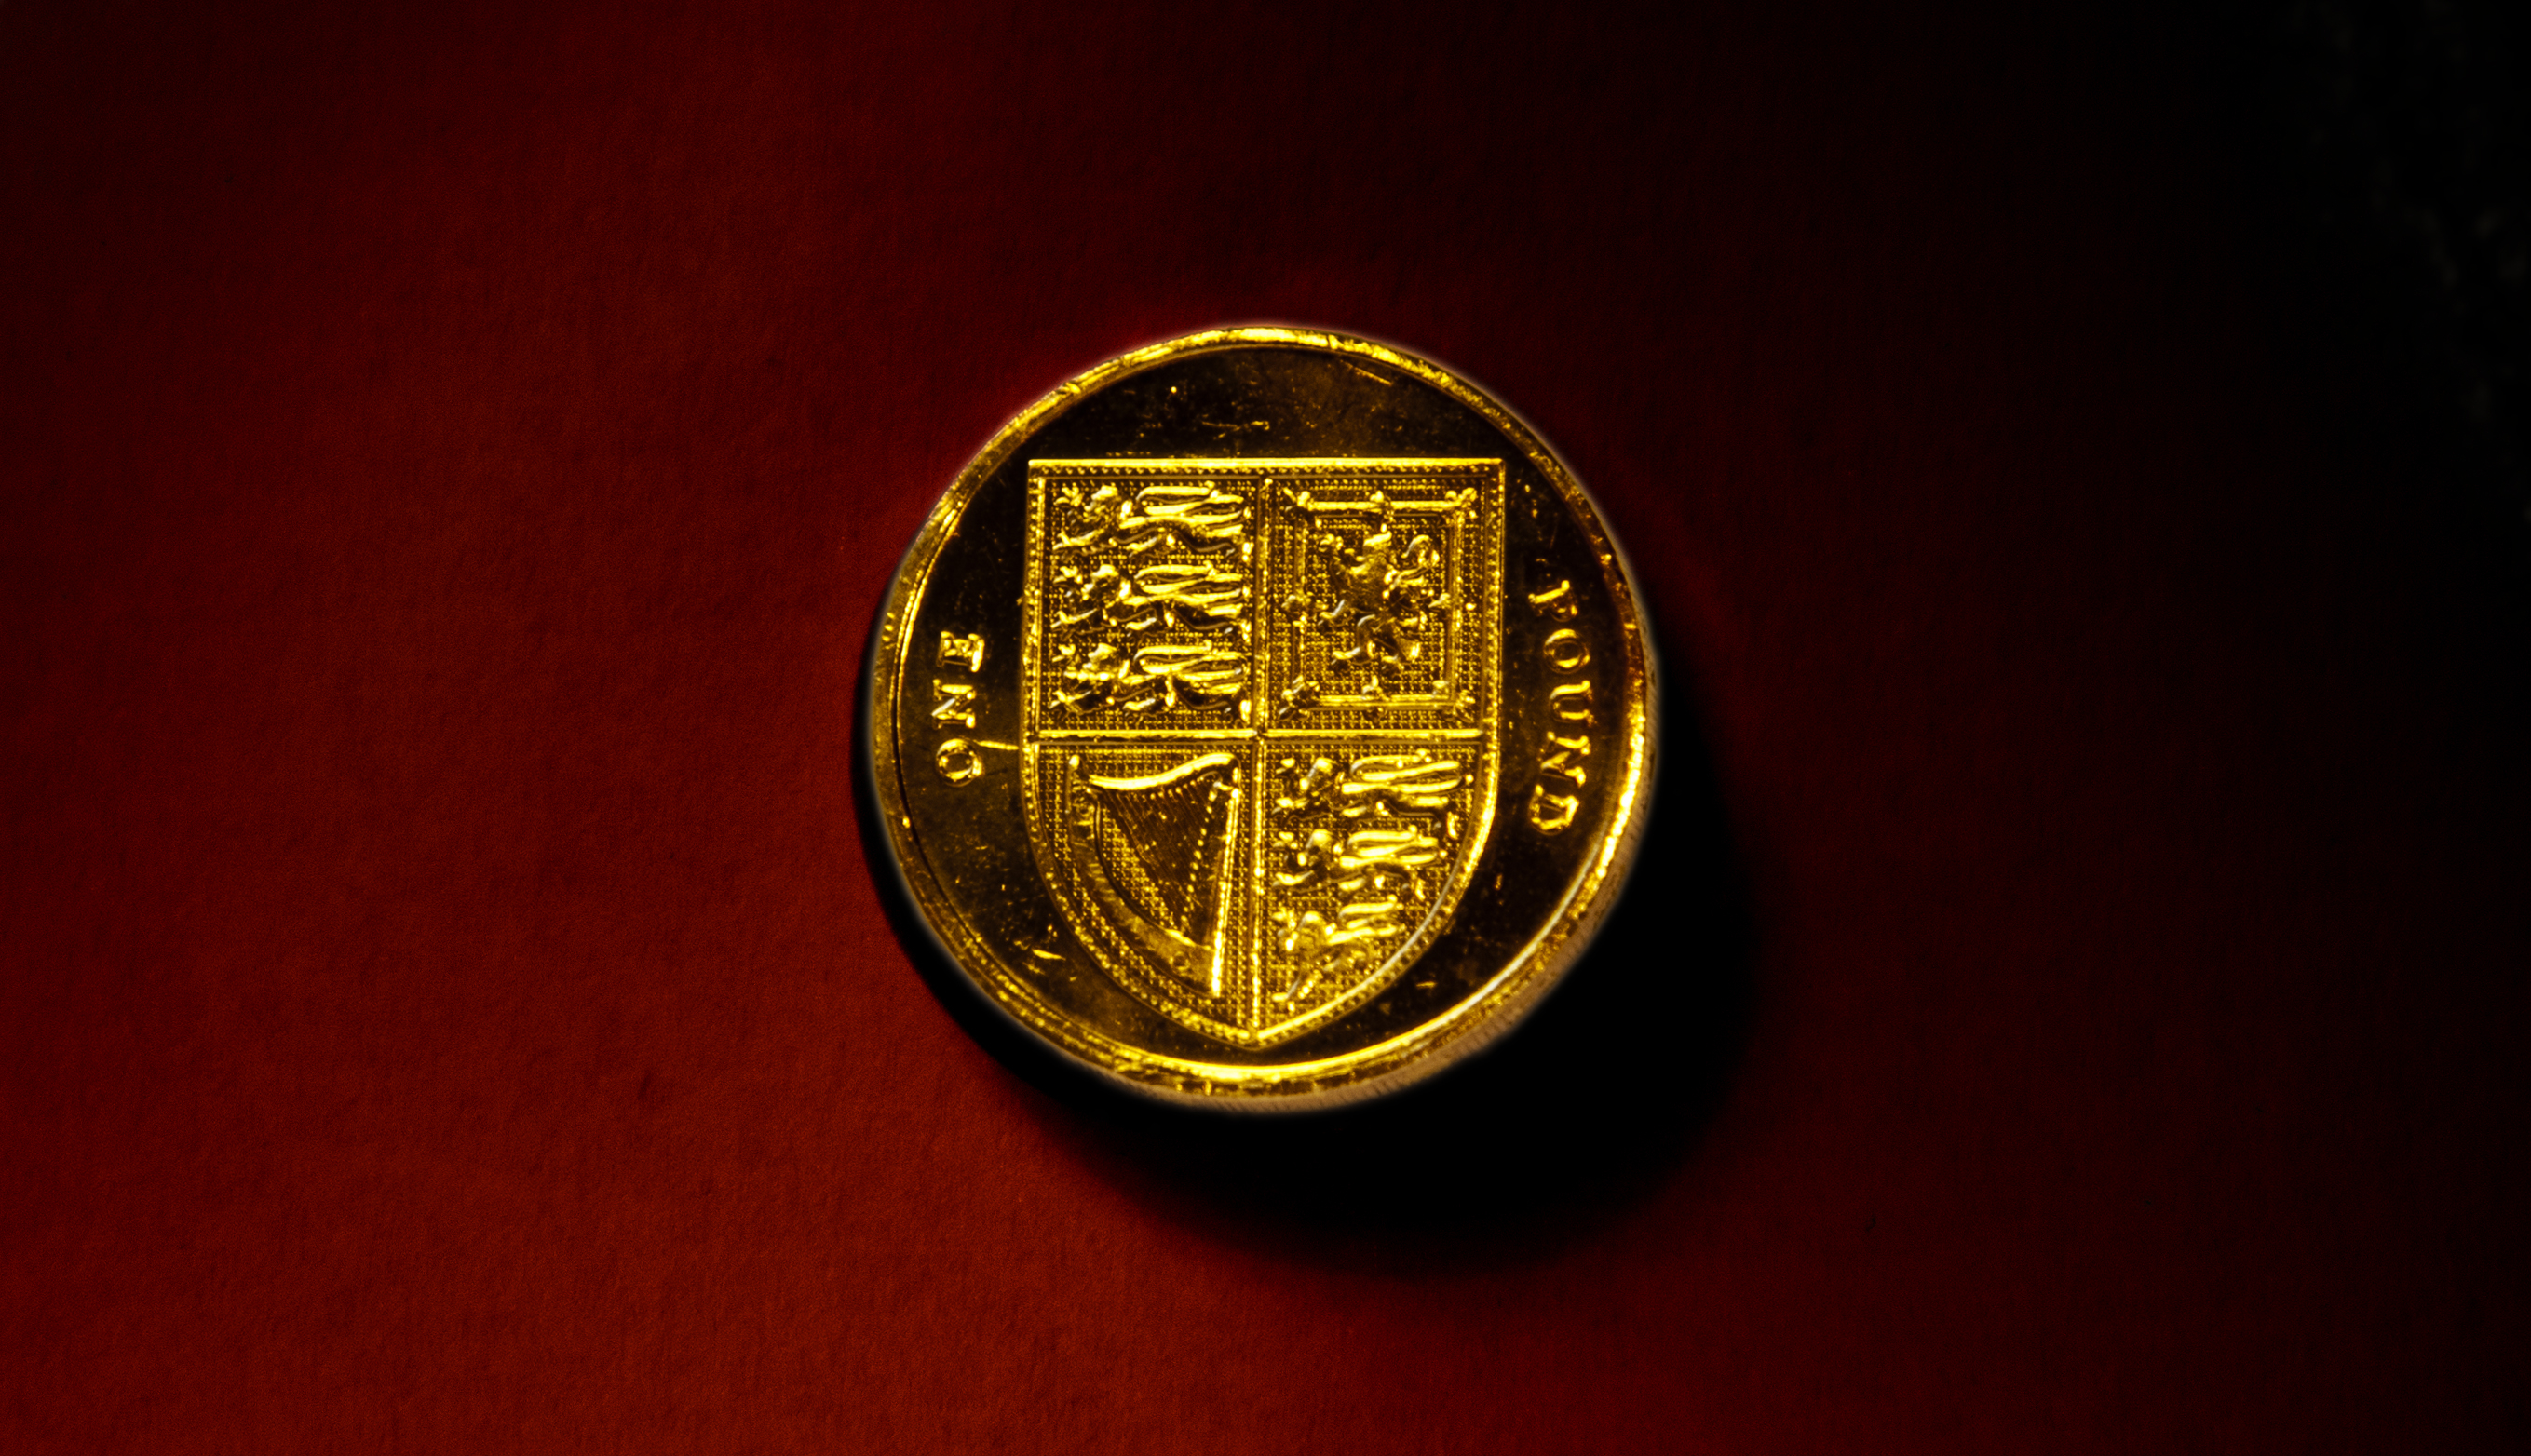 Pound Coin Shield by CGP Grey